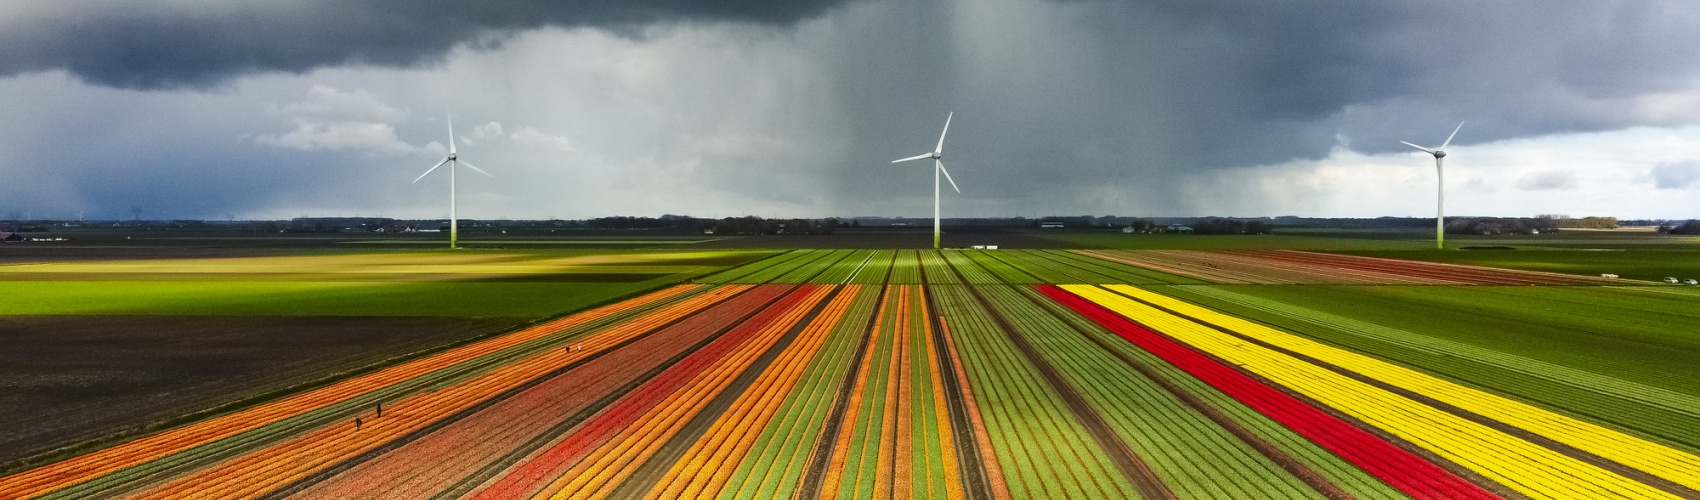 Tulips blossoming in a field with a dark storm sky above aerial drone view 